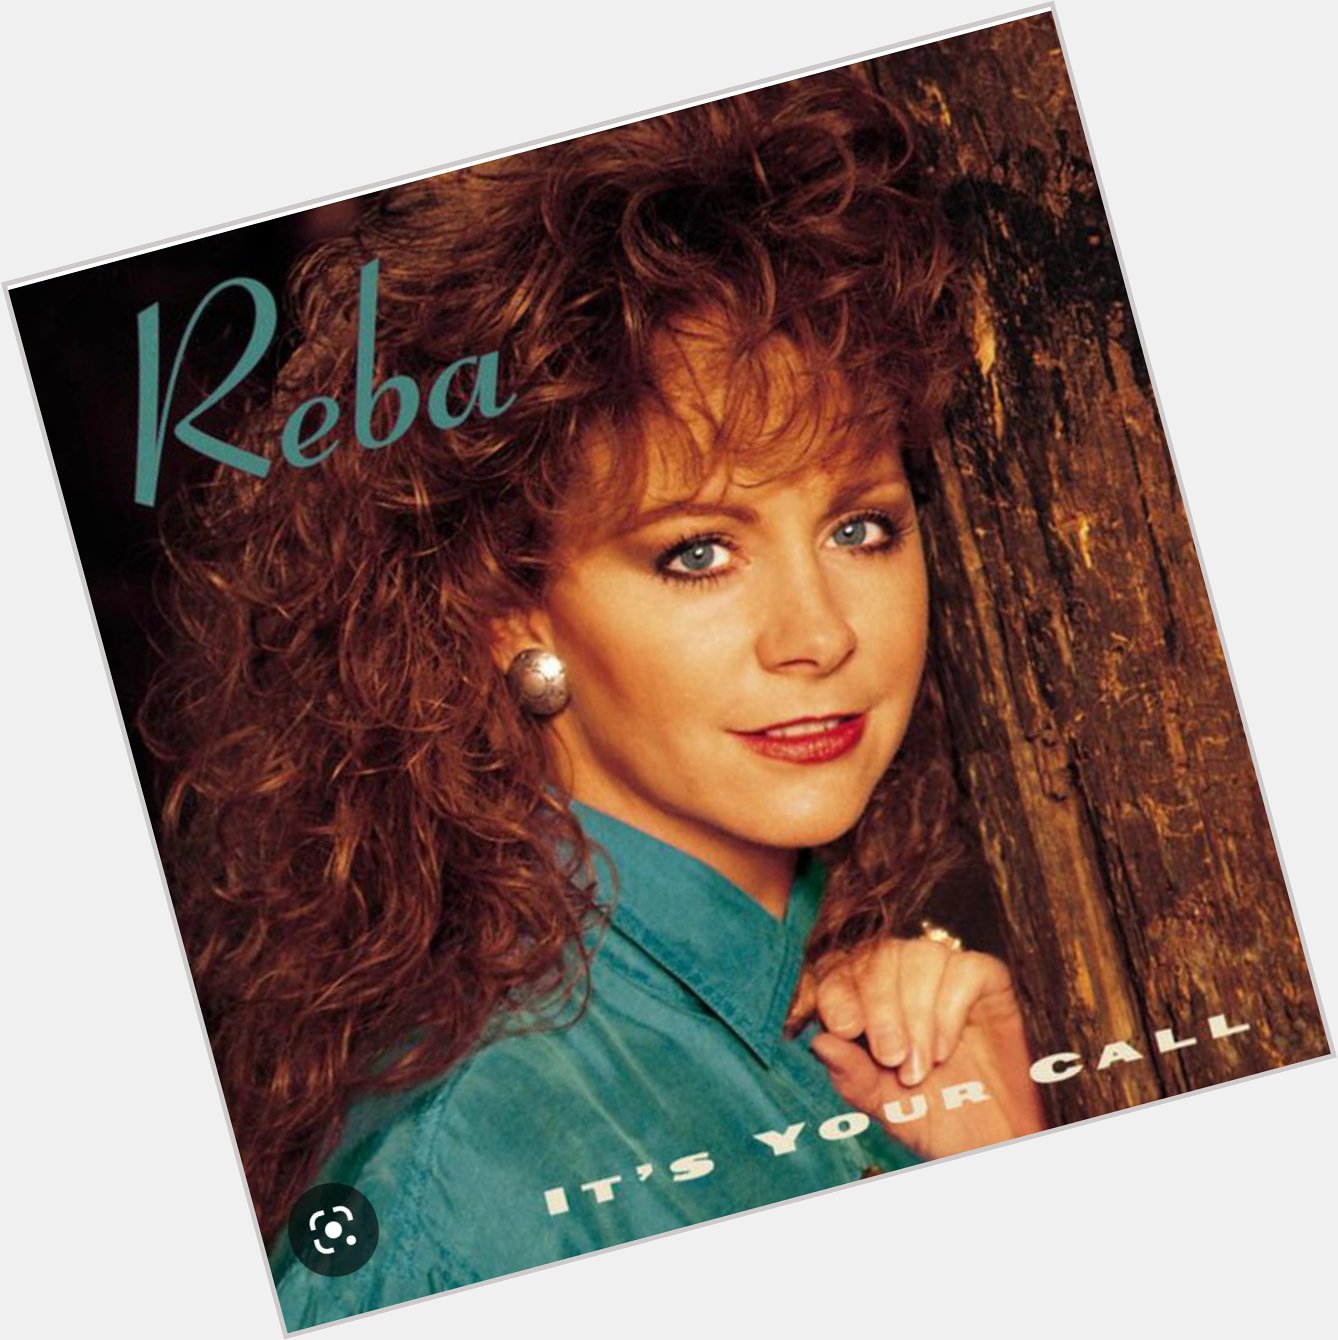  HAPPY BIRTHDAY TO YOU MS.REBA MCENTIRE.
HOPE YOU HAVE A GREAT AND AMAZING BIRTHDAY         